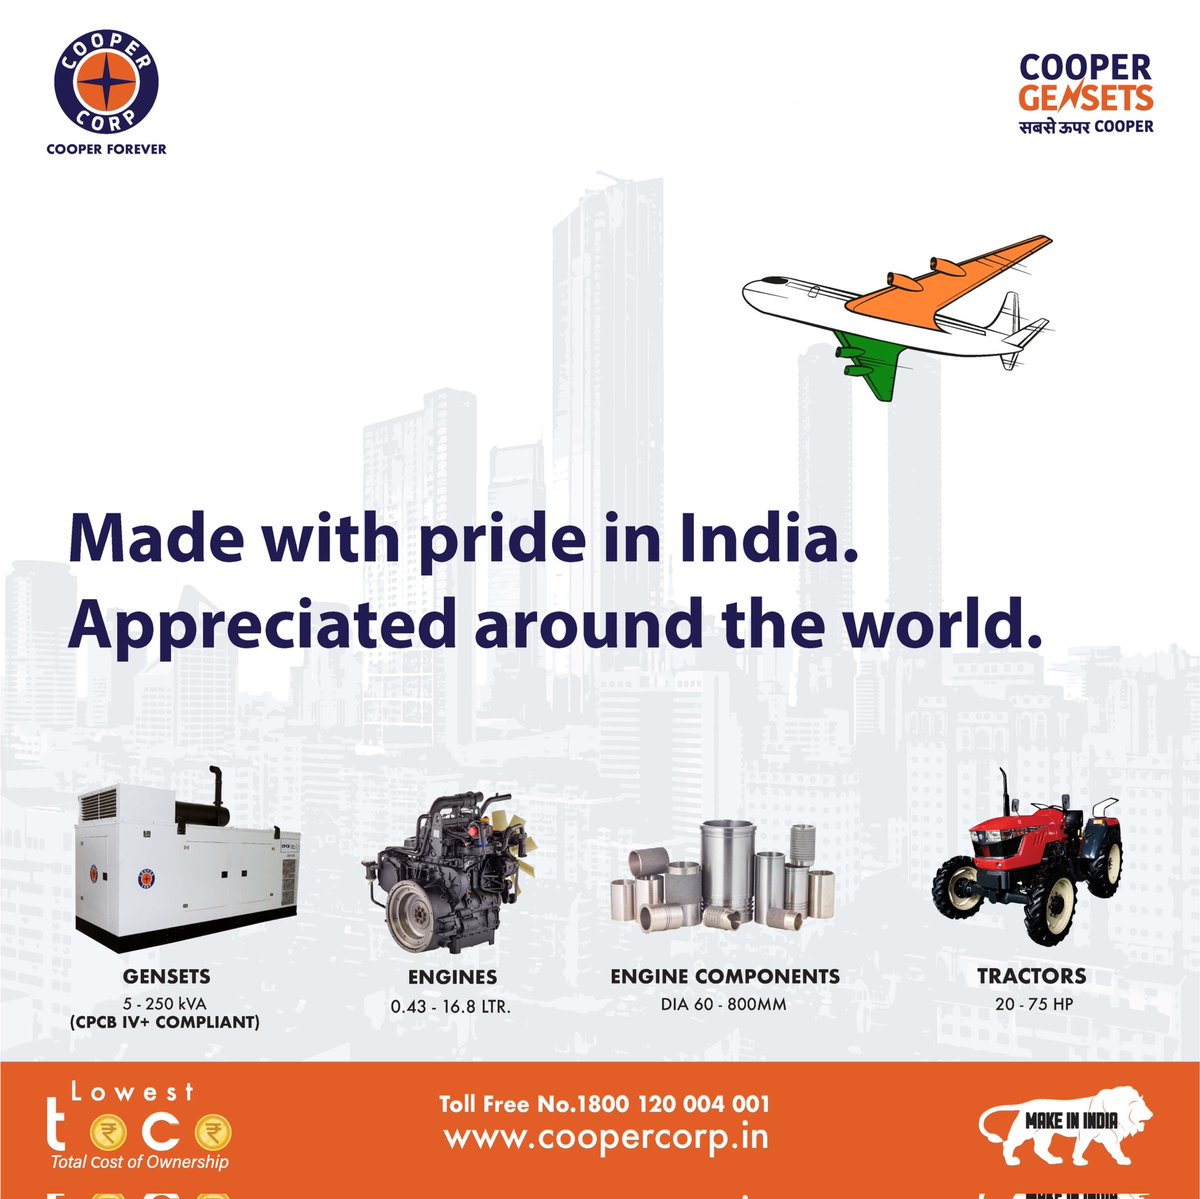 Cooper Corp: Symbolizing the excellence and heritage of Indian craftsmanship.

#SabseOoperCooper
#MadeInIndia
#coopercorp
#CooperGenset